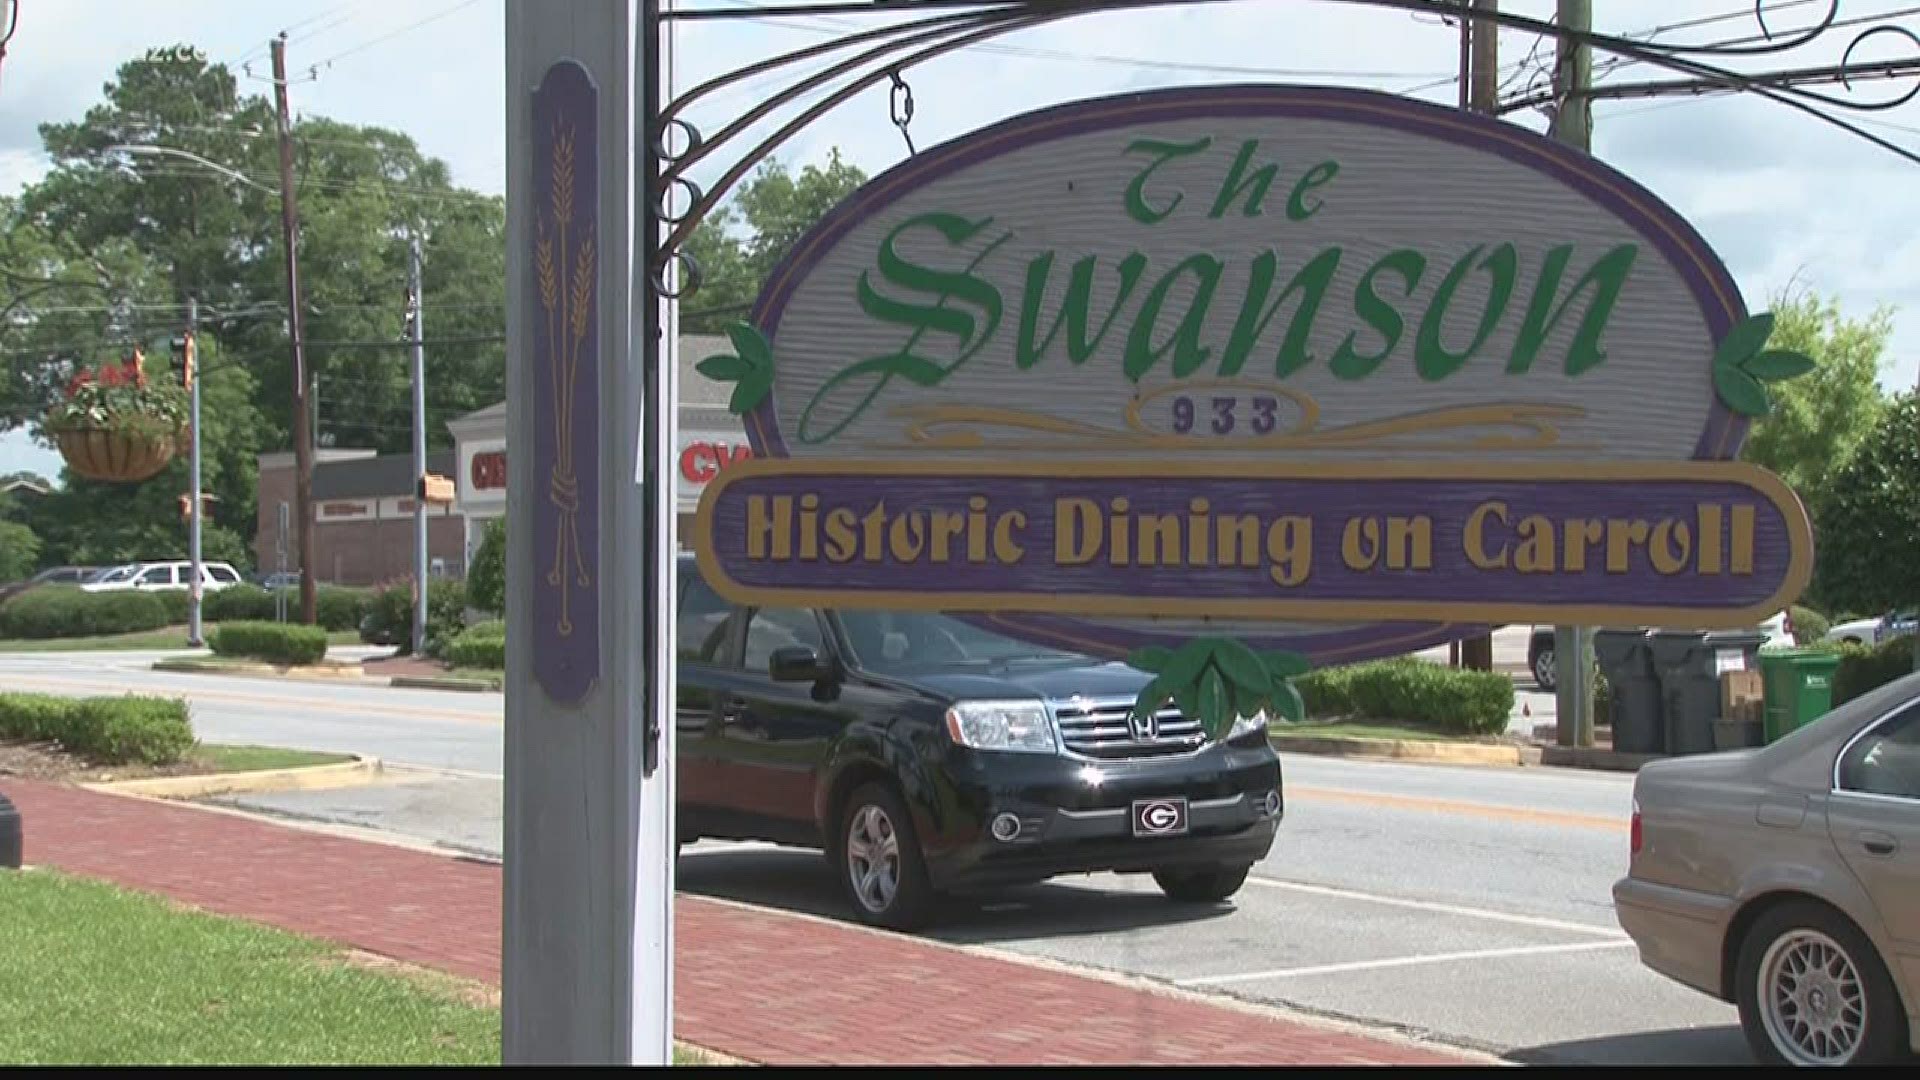 For staff members at The Swanson in Perry, everything had to change to accommodate closing their dining room.